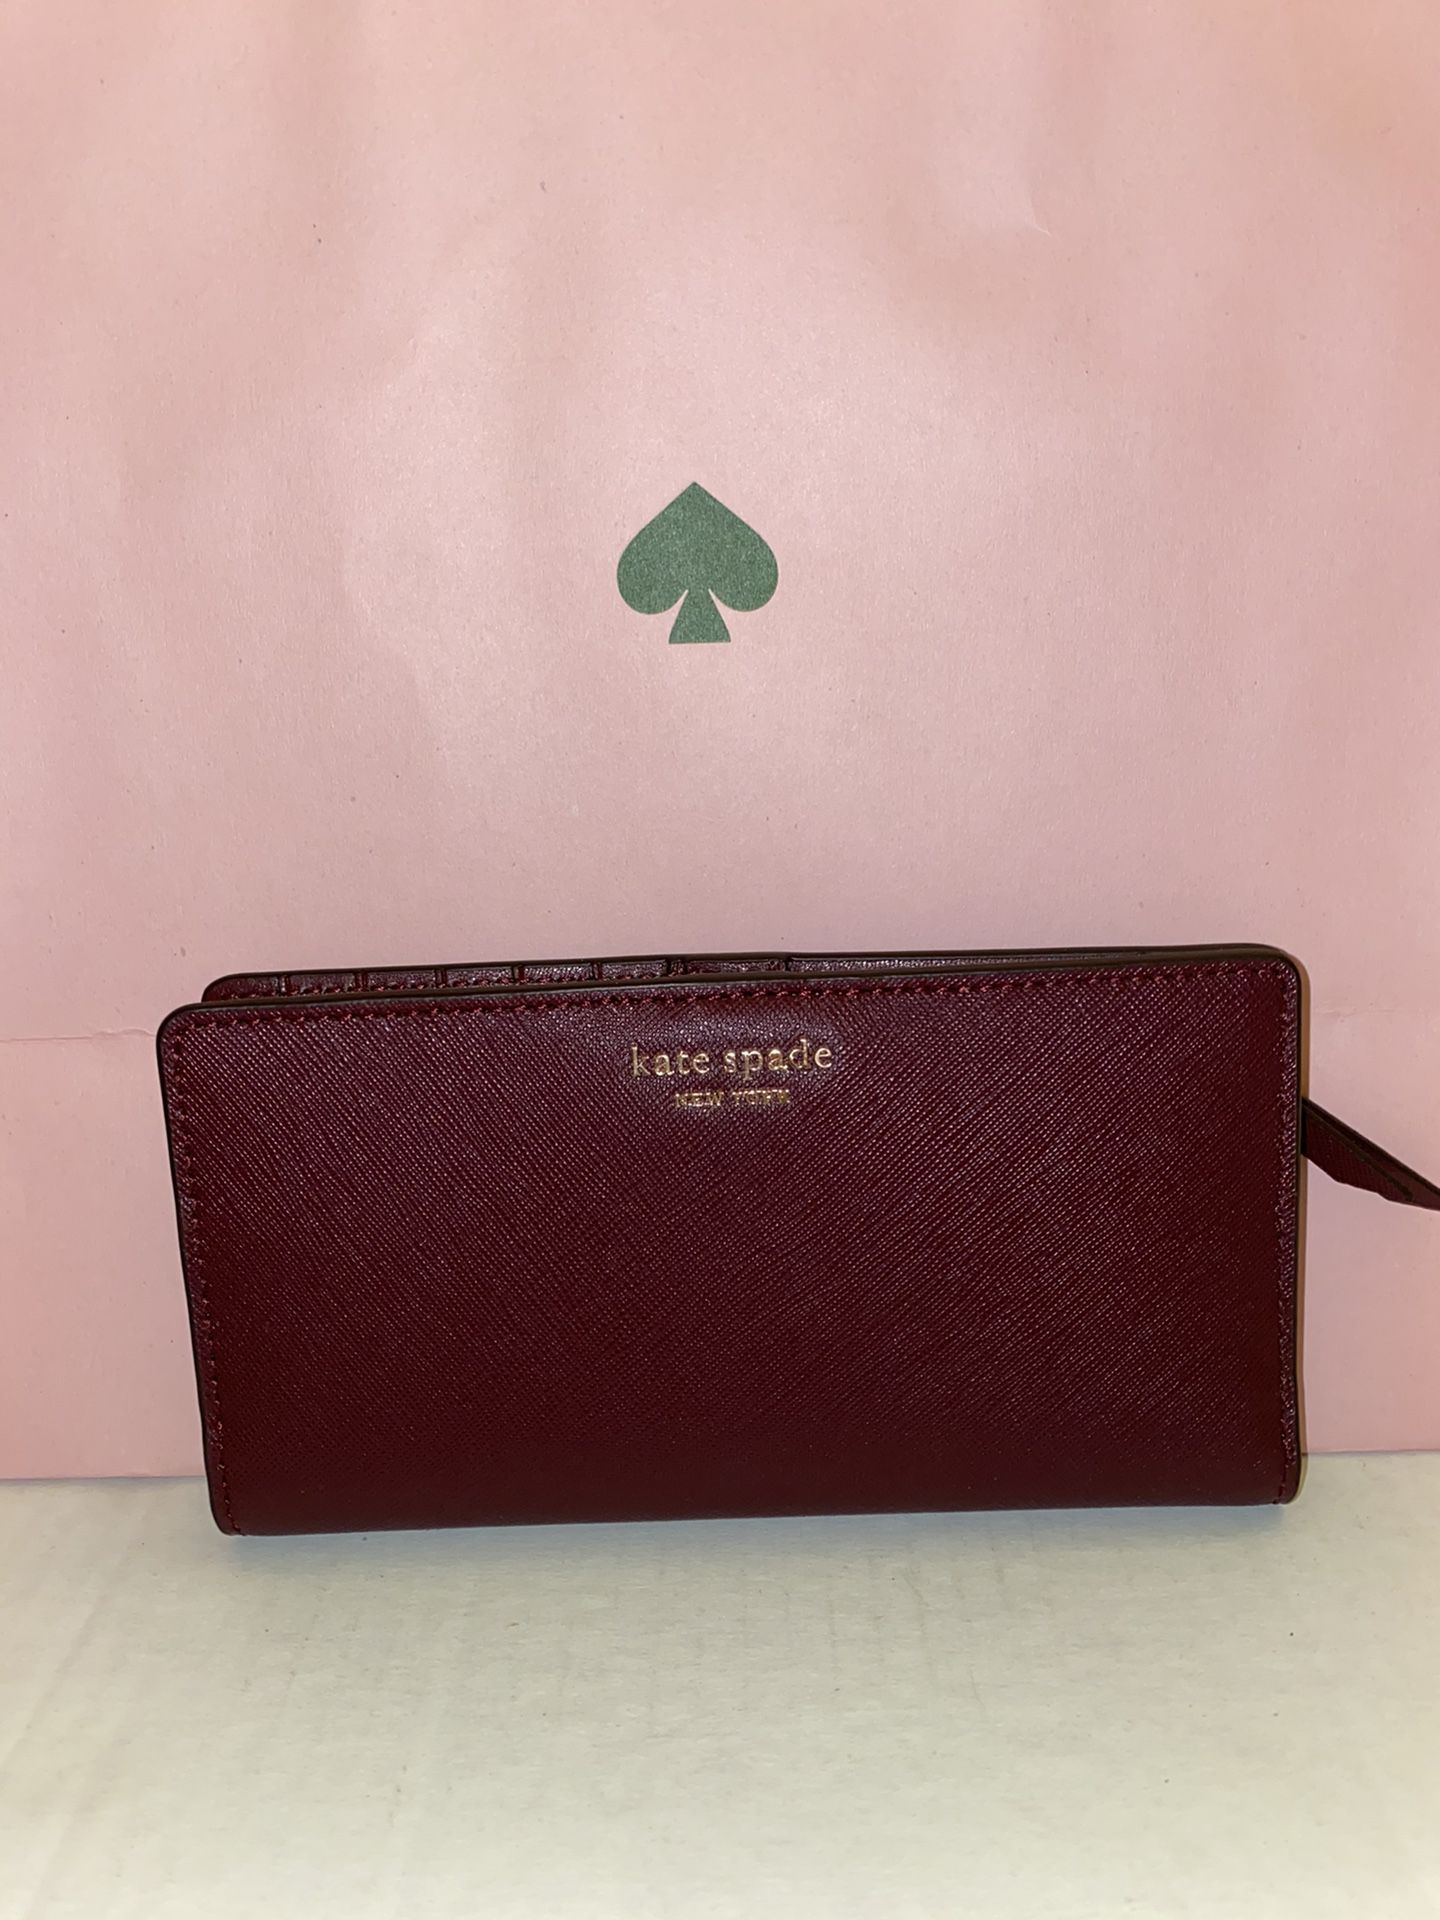 Kate Spade Wallet - Brand New w/tags